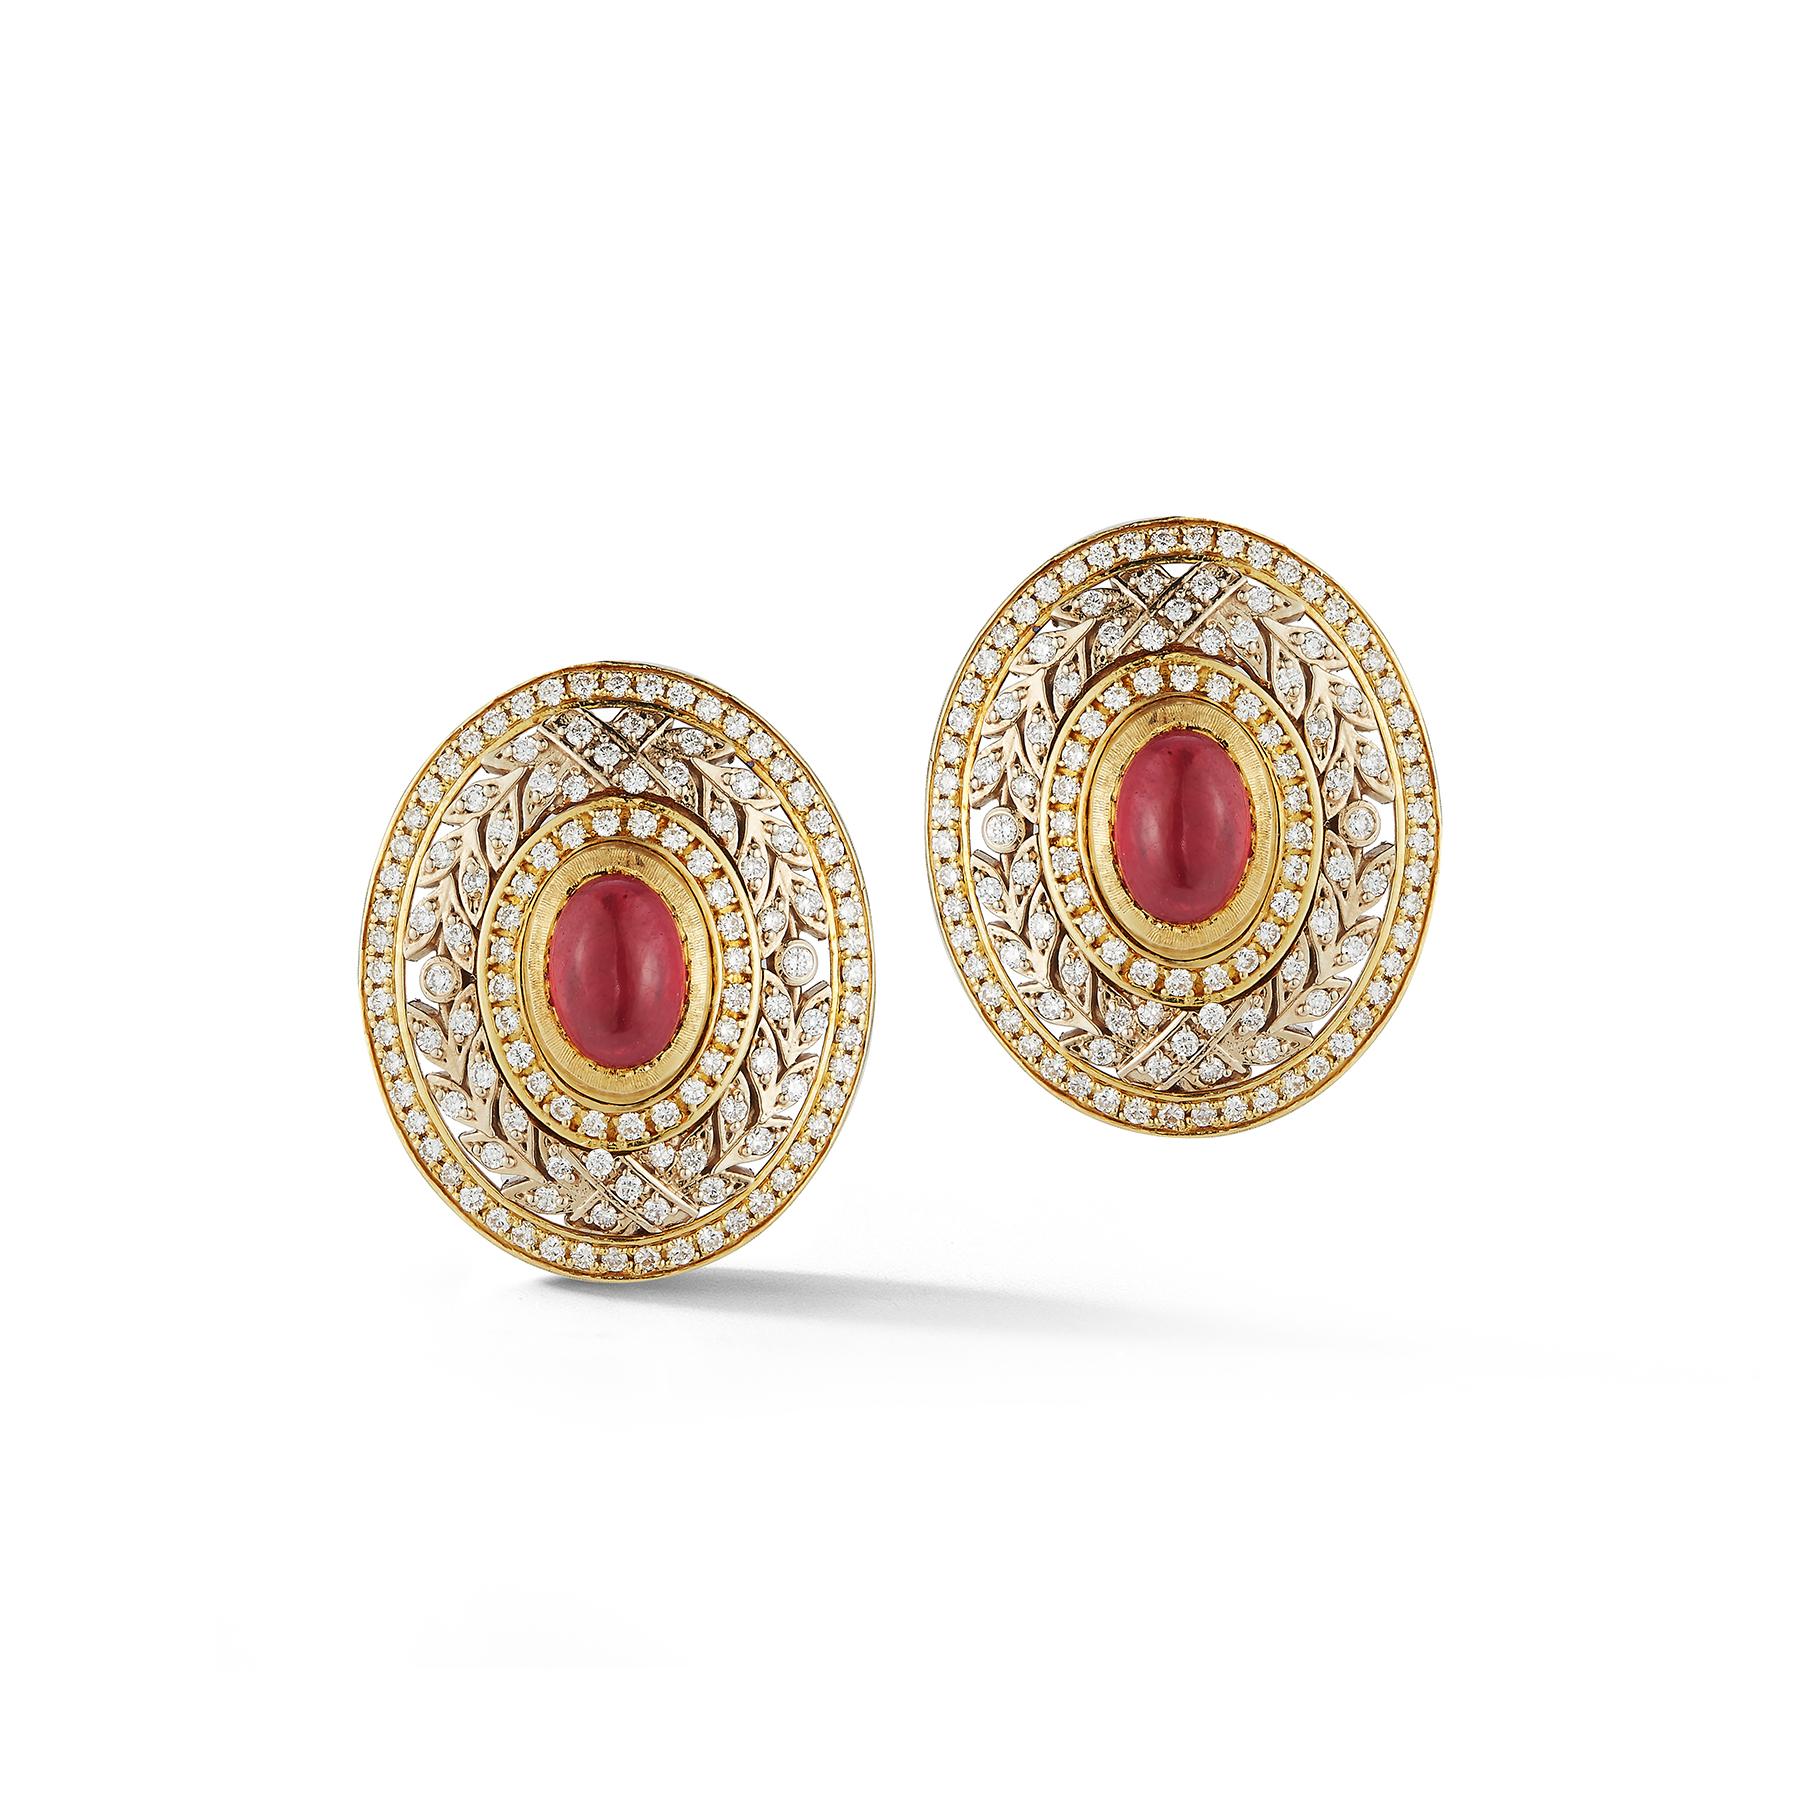 Buccellati Ruby & Diamond Earrings , 2 cabochon rubies approximately 4.00 cts, surrounded by round cut diamonds approximately 3.50 cts set in 18k yellow gold.

Back Type: Clip on

Measurements: 1